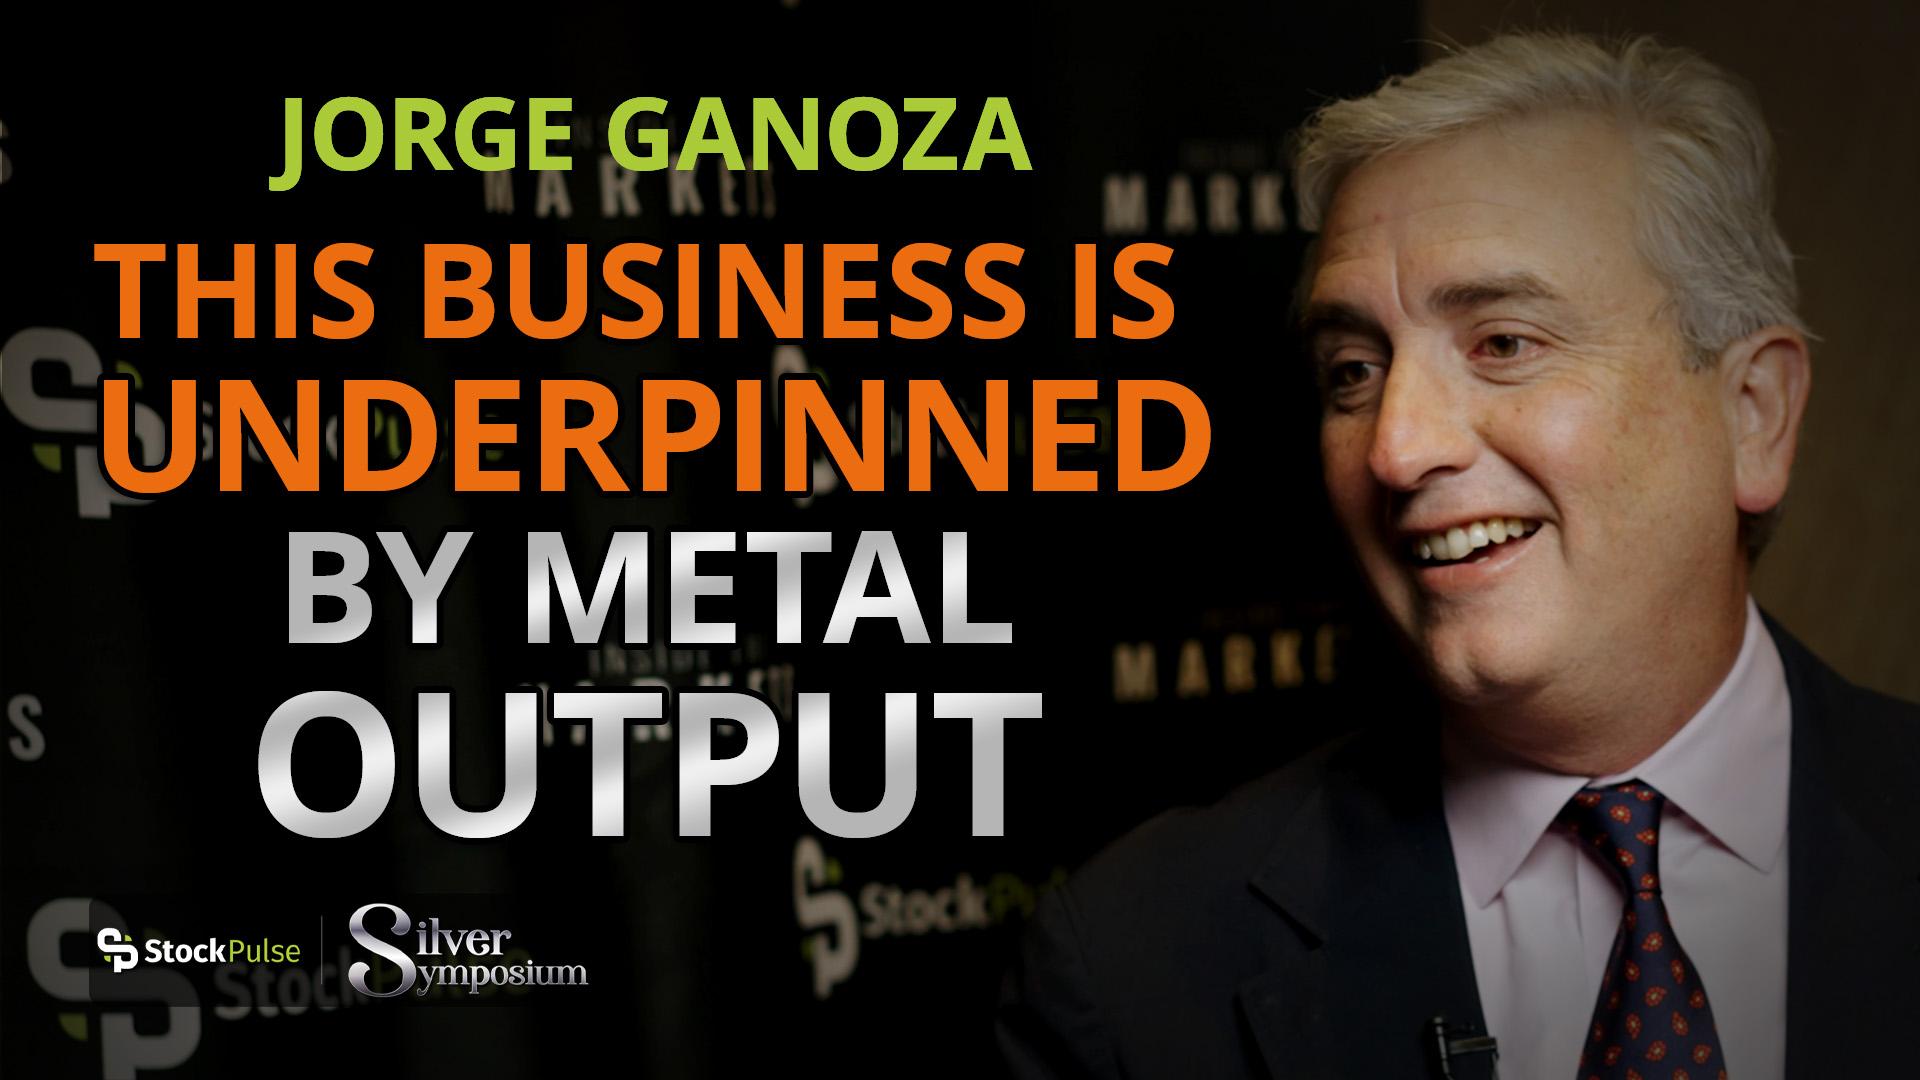 Jorge Ganoza: This Business is Underpinned by Metal Output